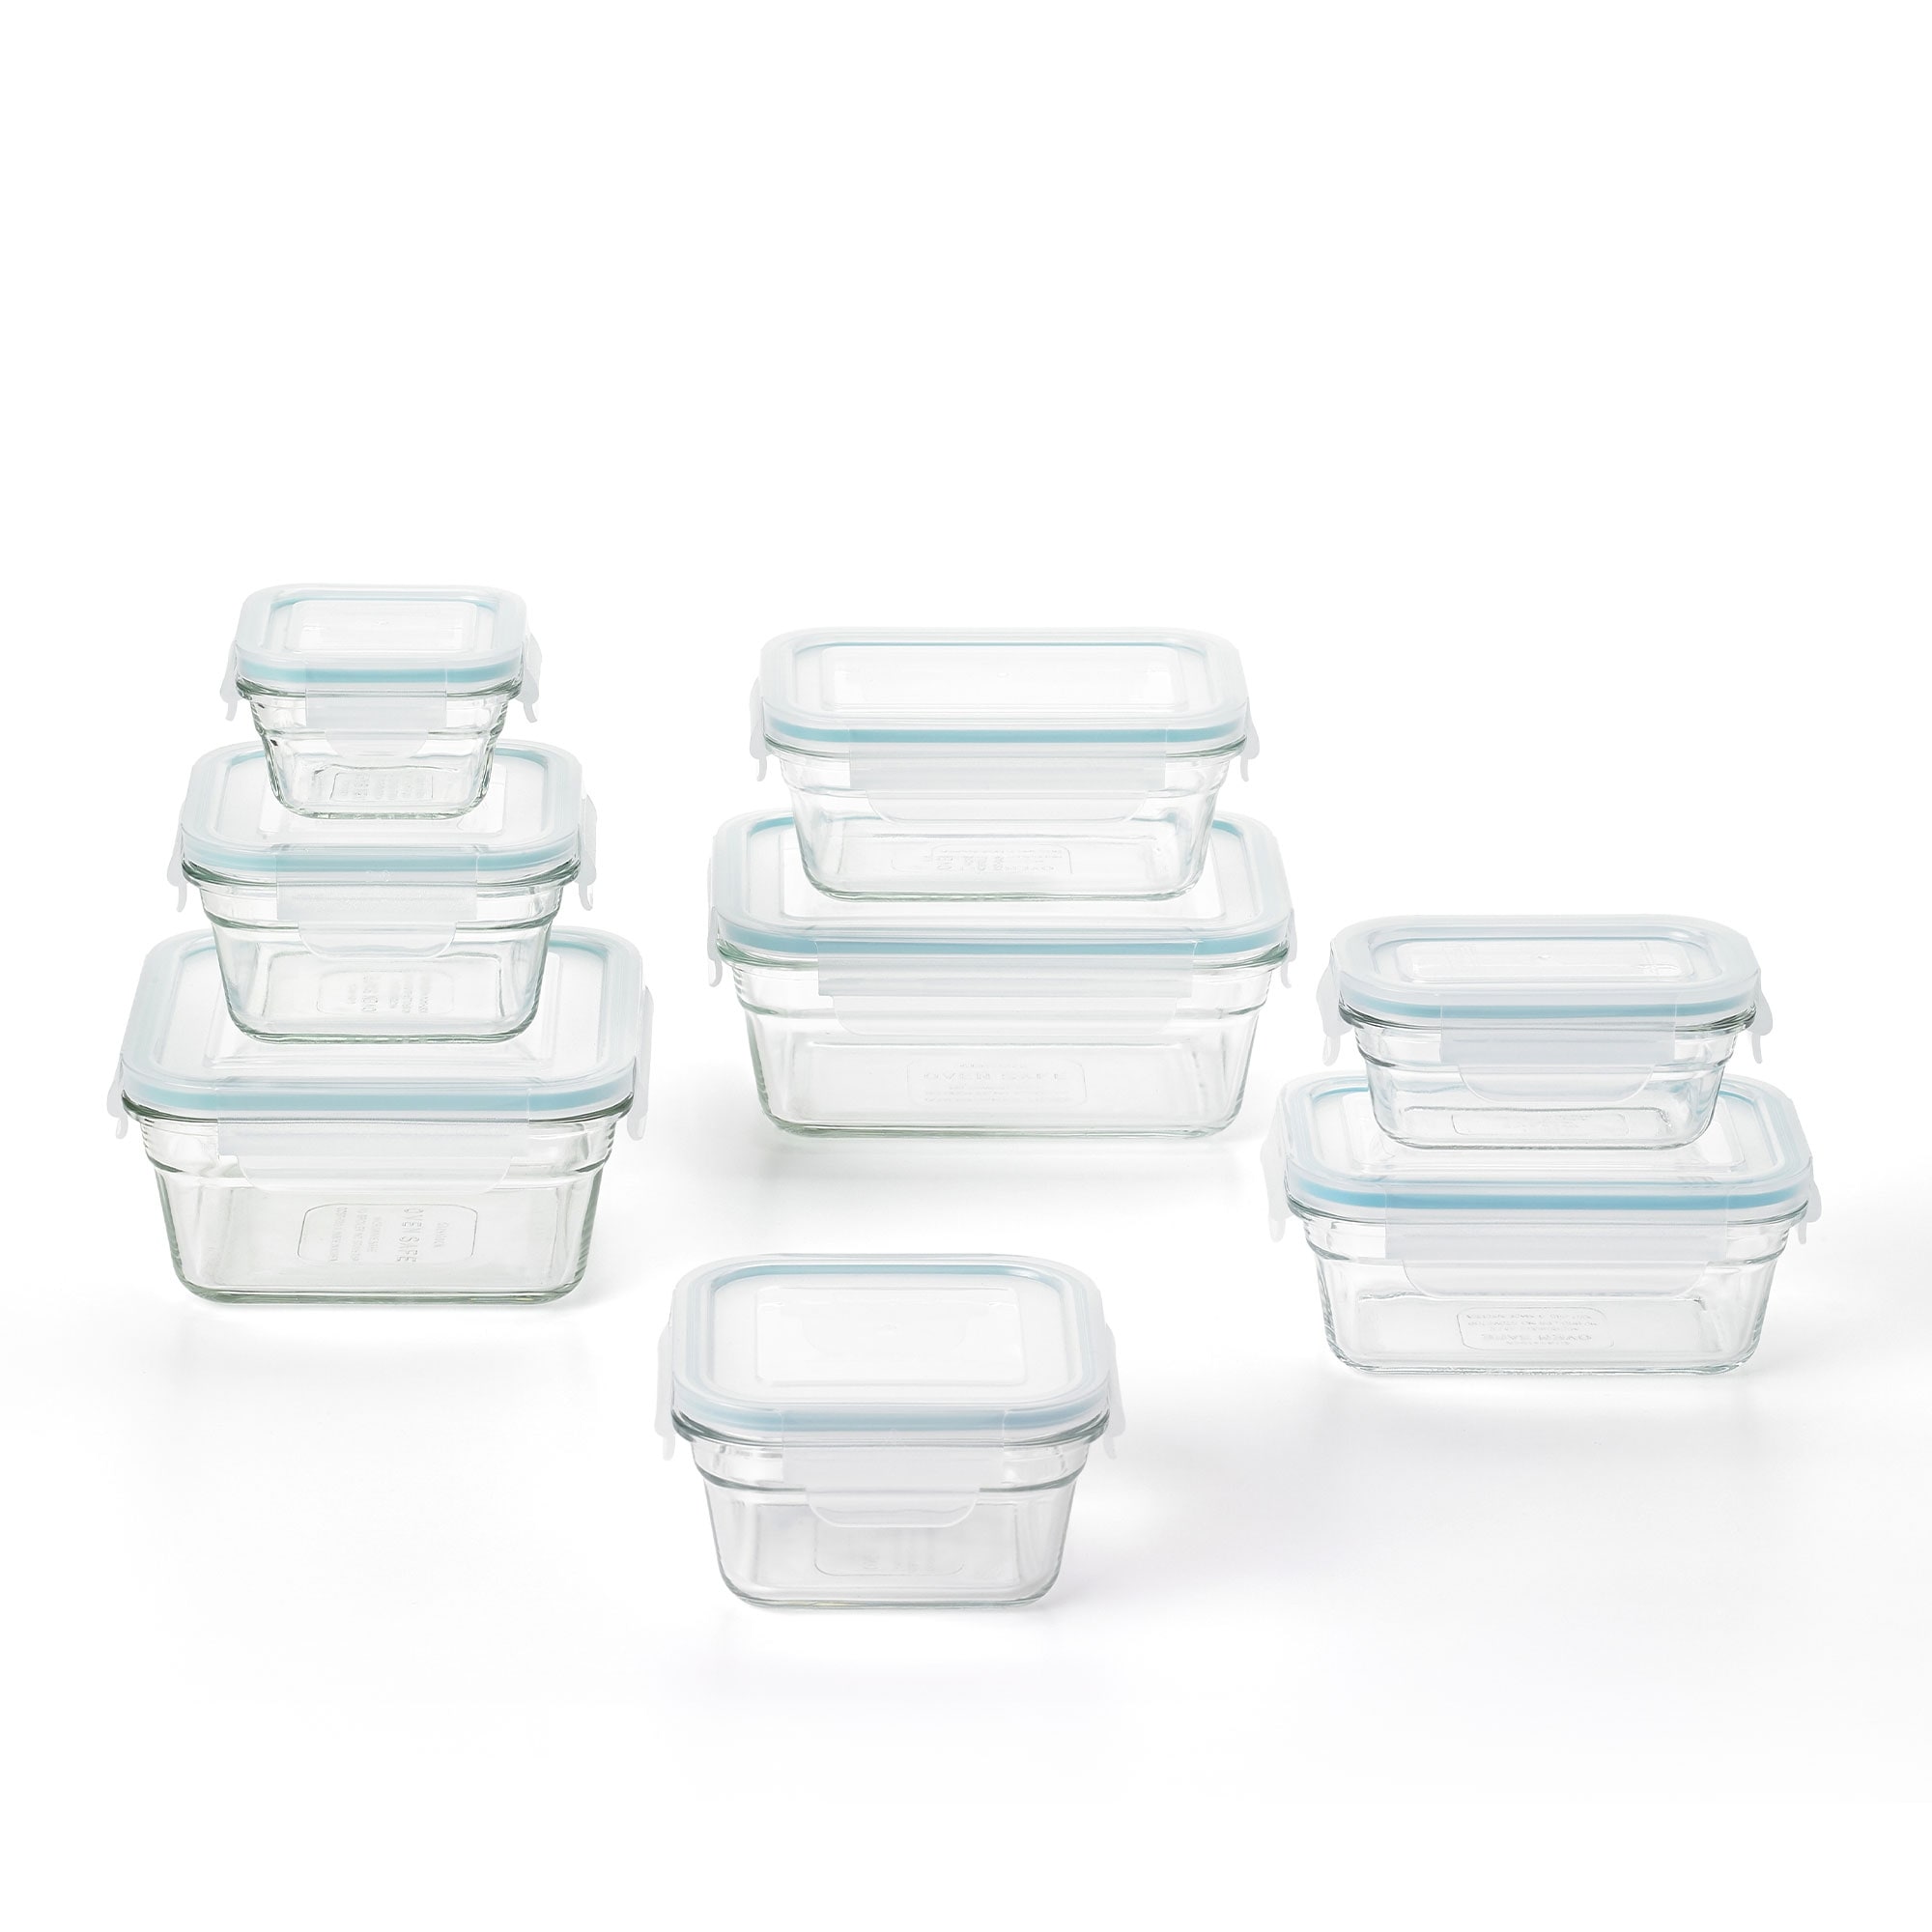 https://ak1.ostkcdn.com/images/products/is/images/direct/26786f200862755b937c16c70ca93d43951f0c1e/Glasslock-Tempered-Glass-Food-Storage-Containers-with-Locking-Lids%2C-16-Piece-Set.jpg